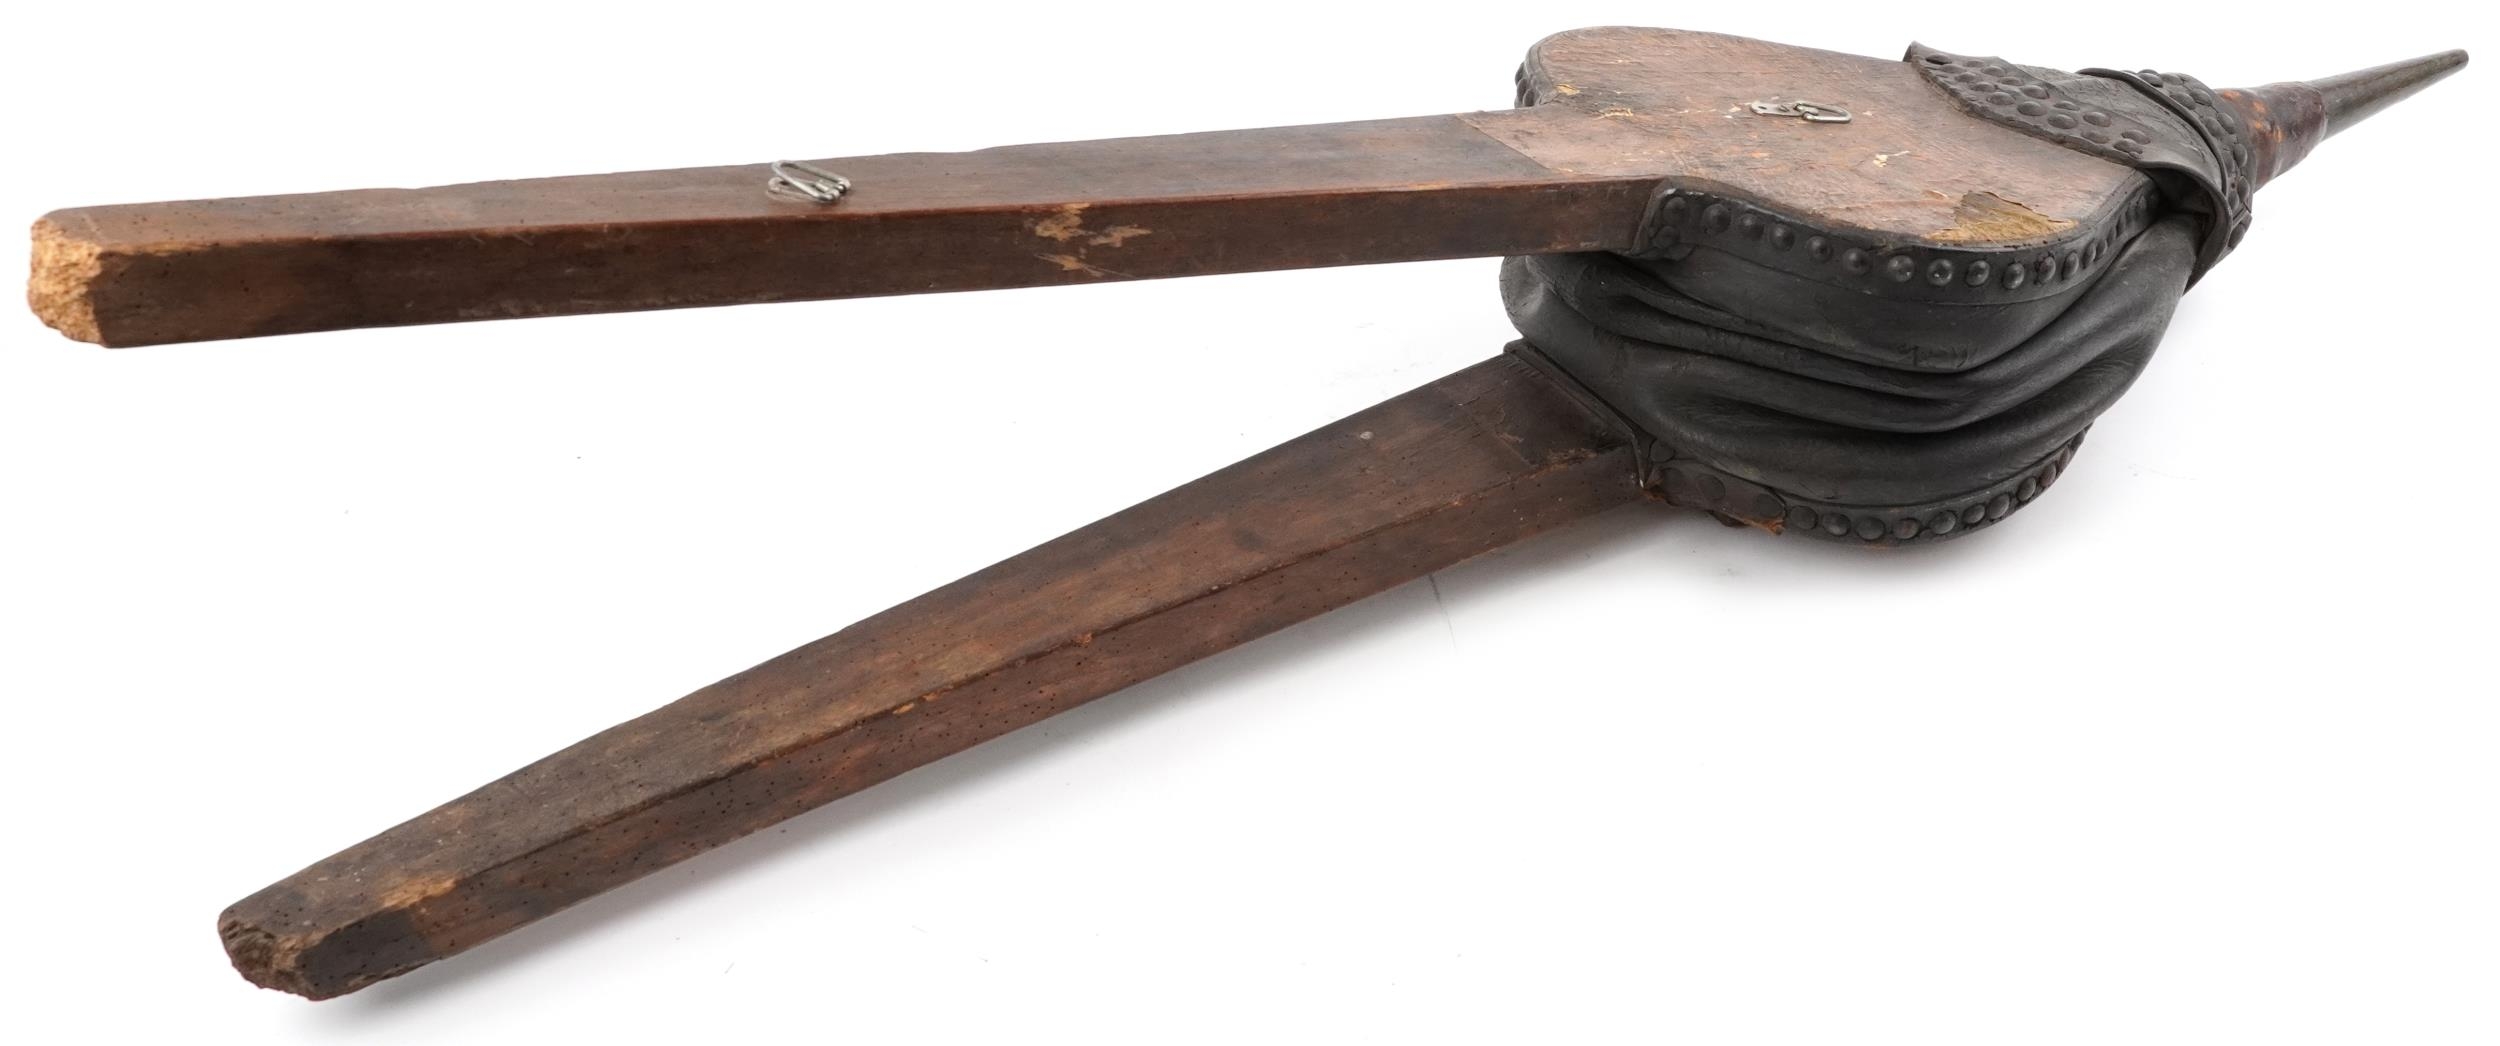 Pair of large leather mounted and studded blacksmith's forge bellows, 125cm in length - Image 2 of 4